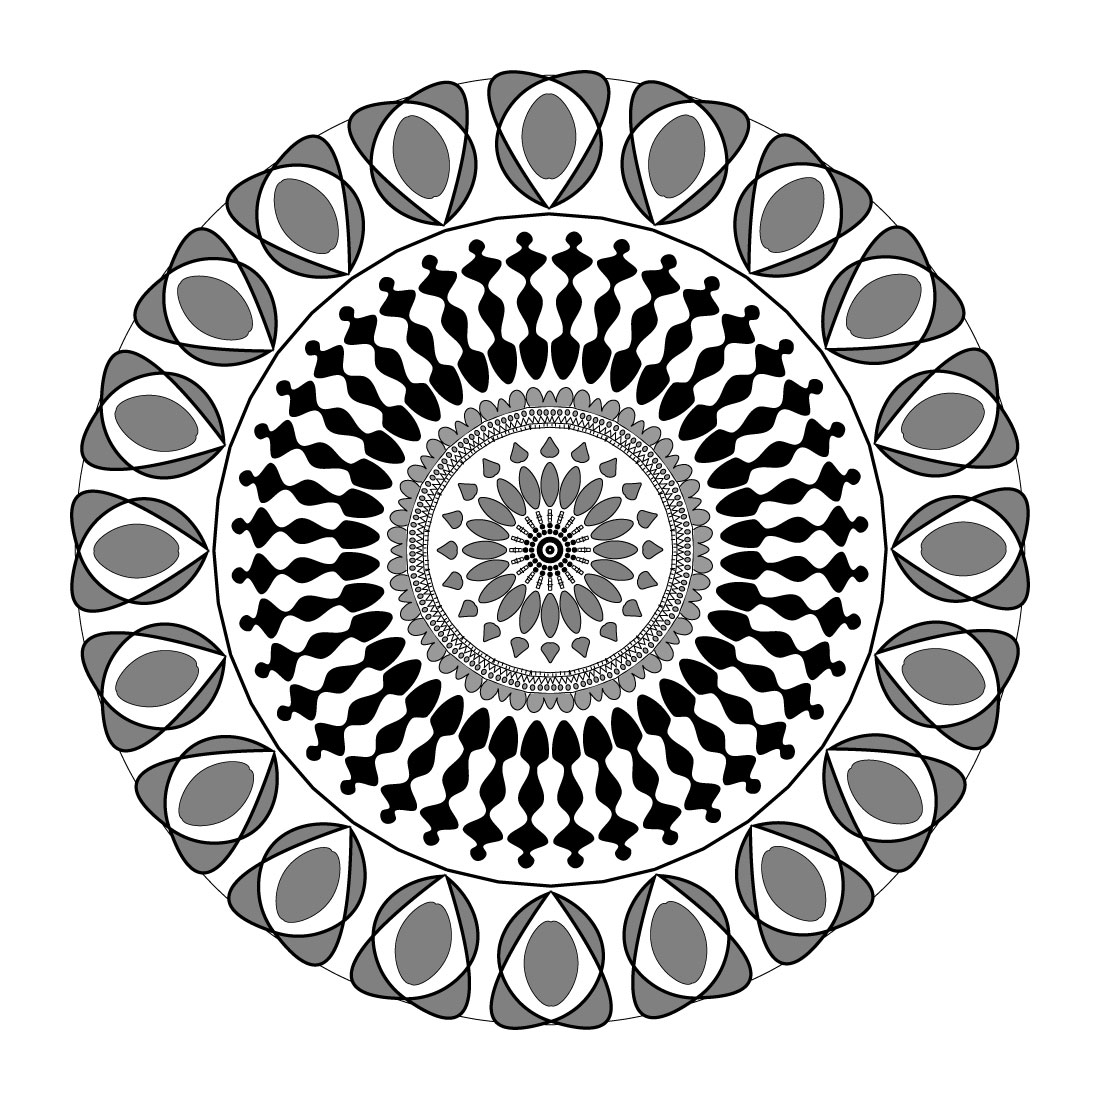 Mandala-art-with-spiral-ended-with-black-and-gray preview image.